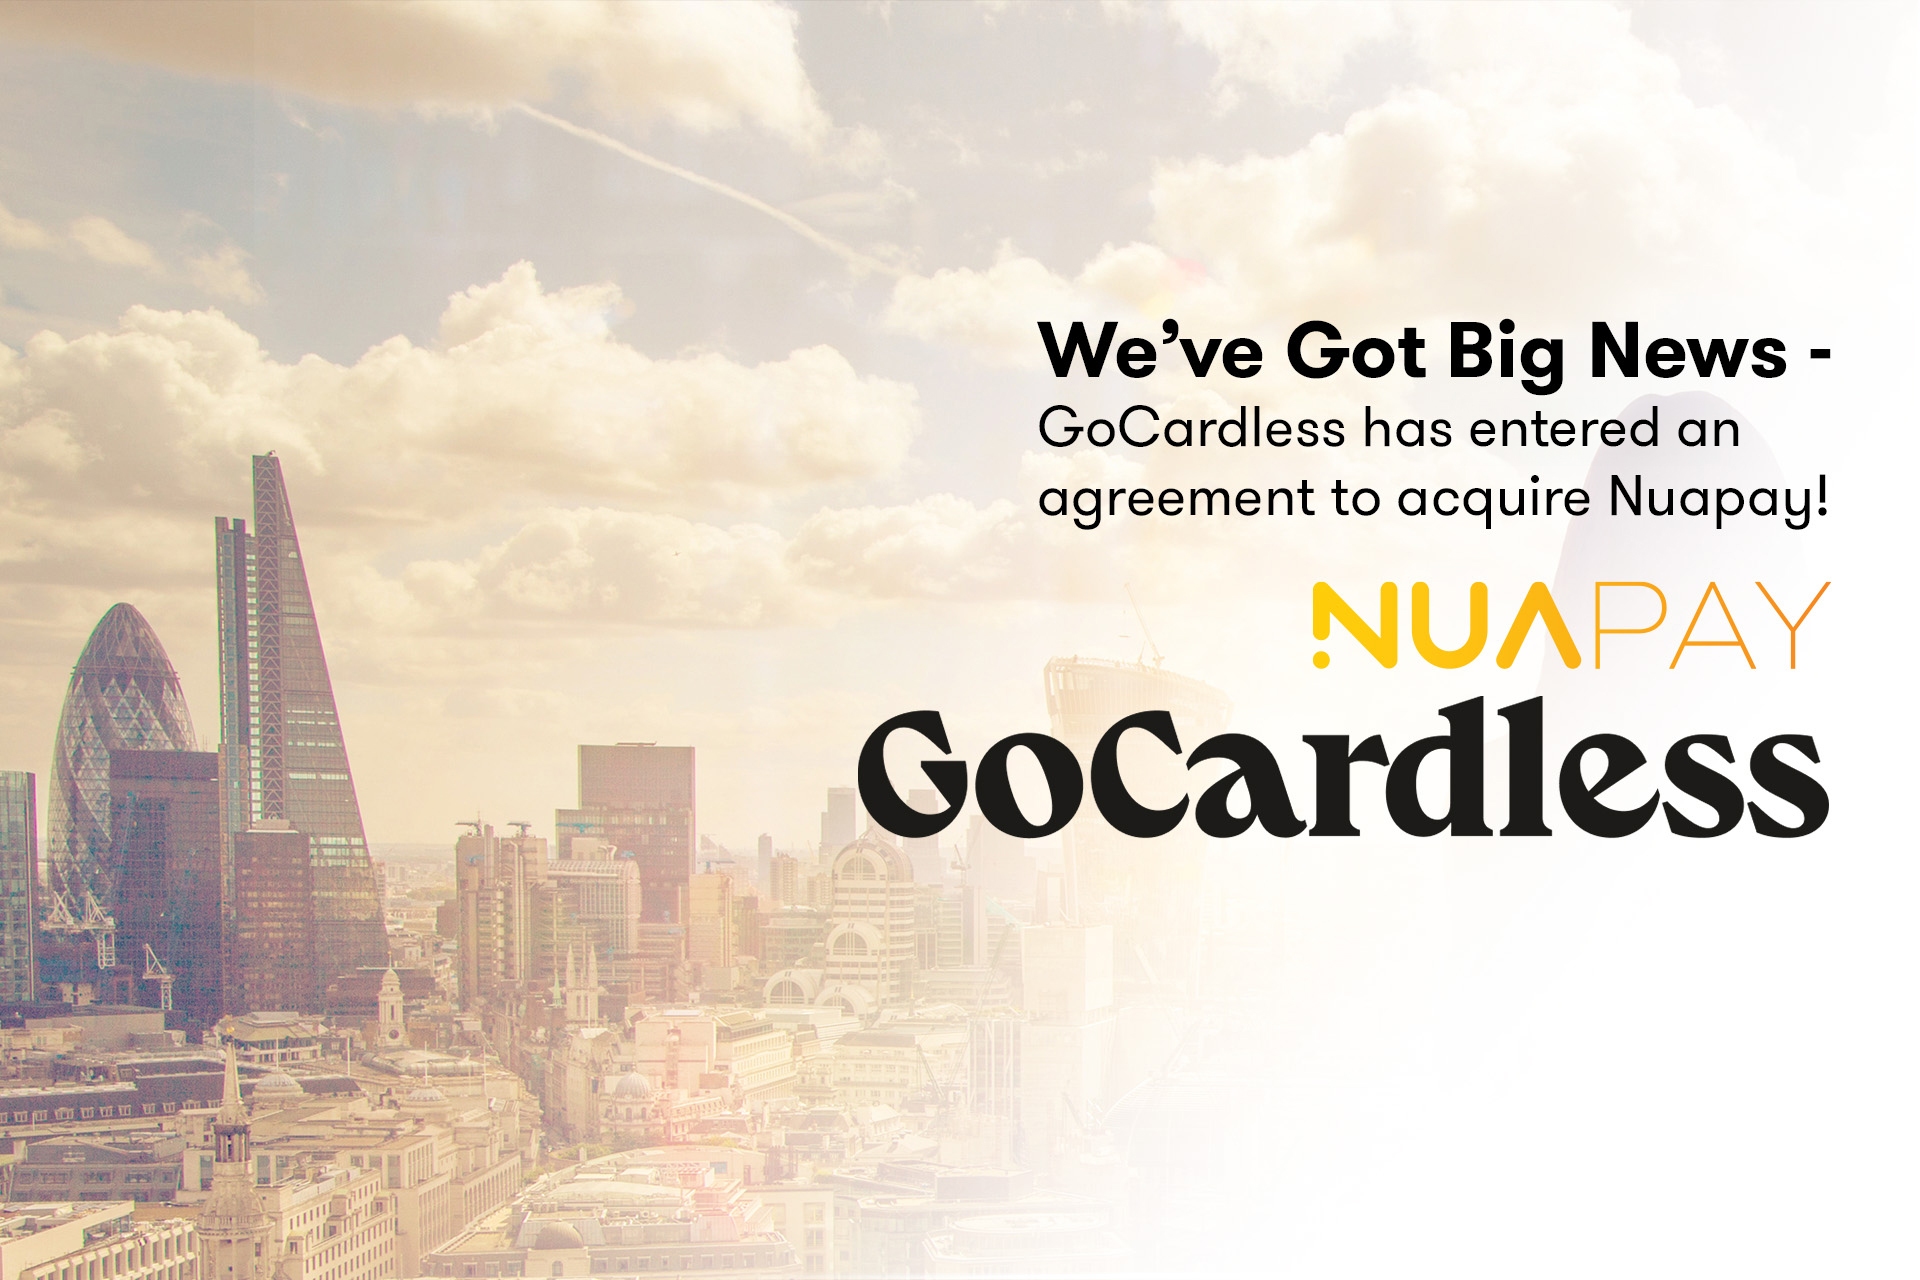 GoCardless has entered an agreement to acquire Sentenial & Nuapay